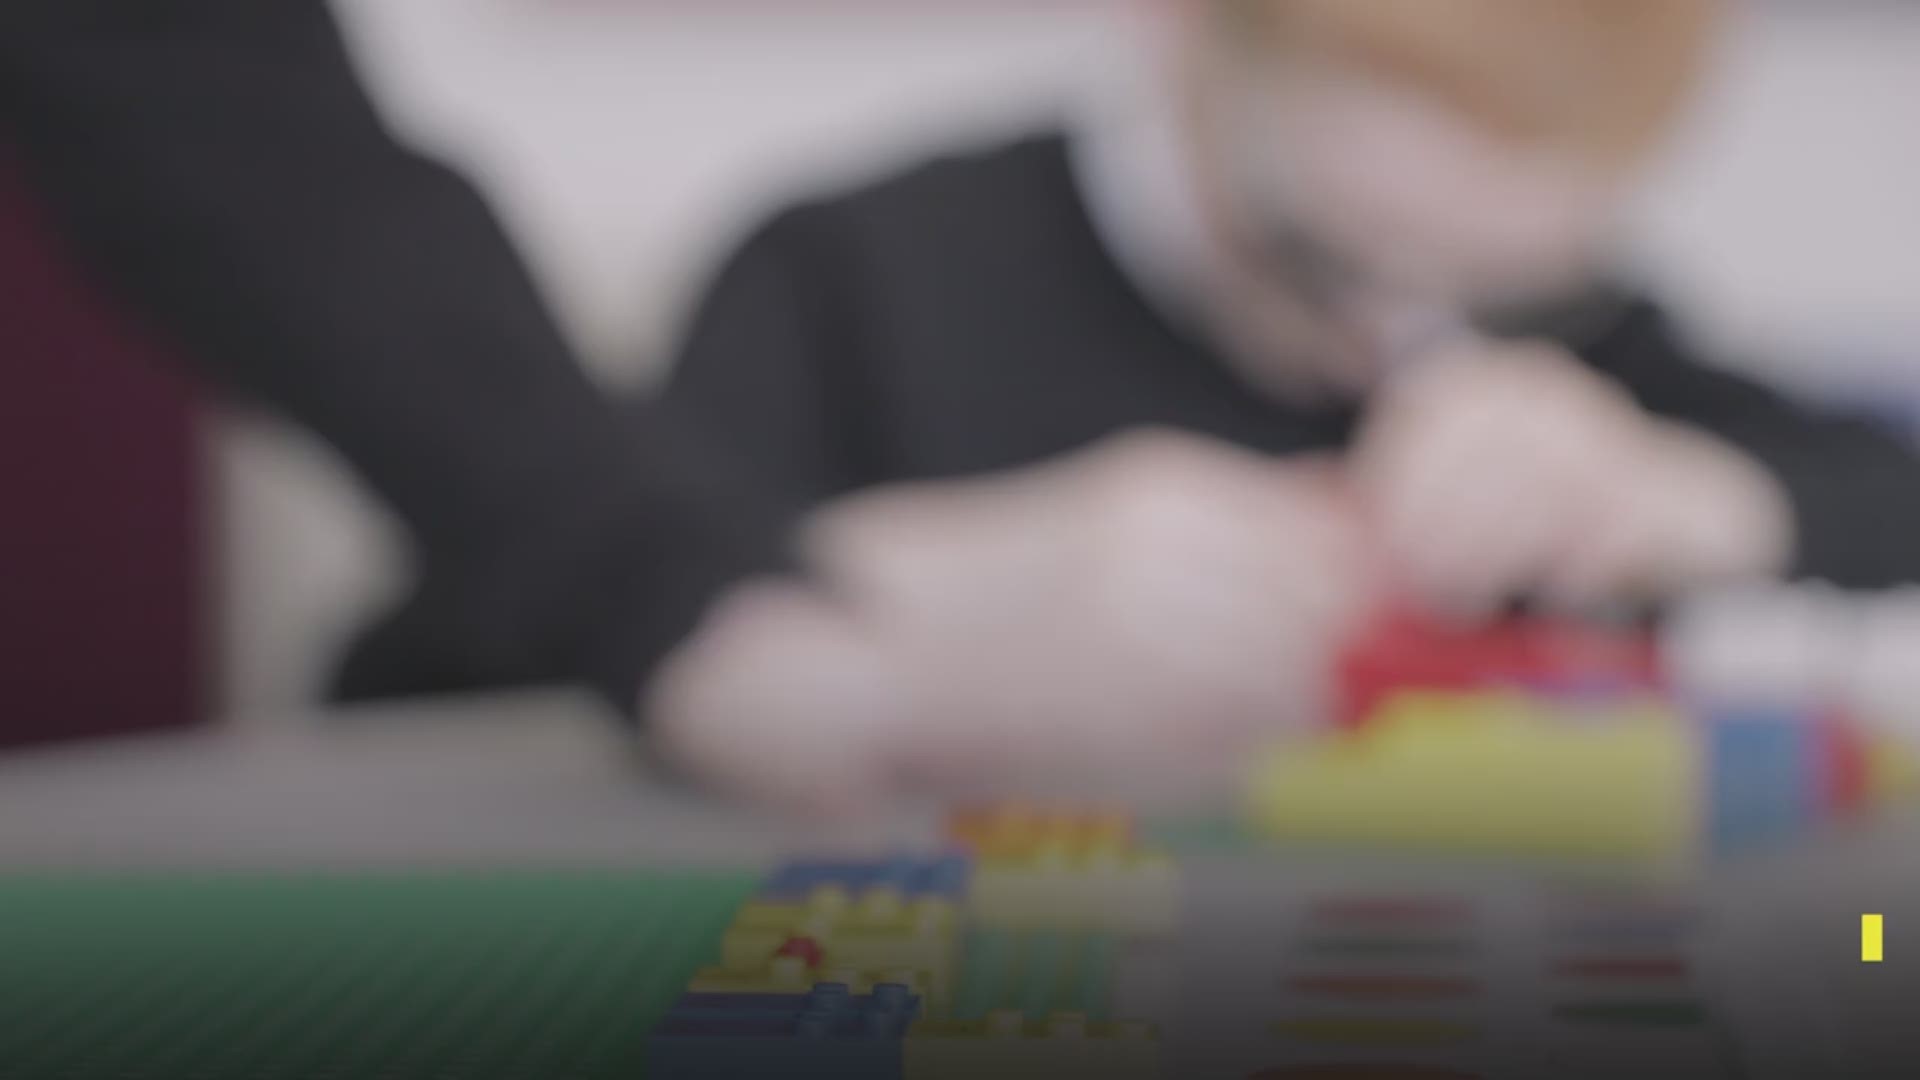 The LEGO Foundation is piloting a new product to help blind and visually impaired children learn to read Braille. (Video: LEGO)